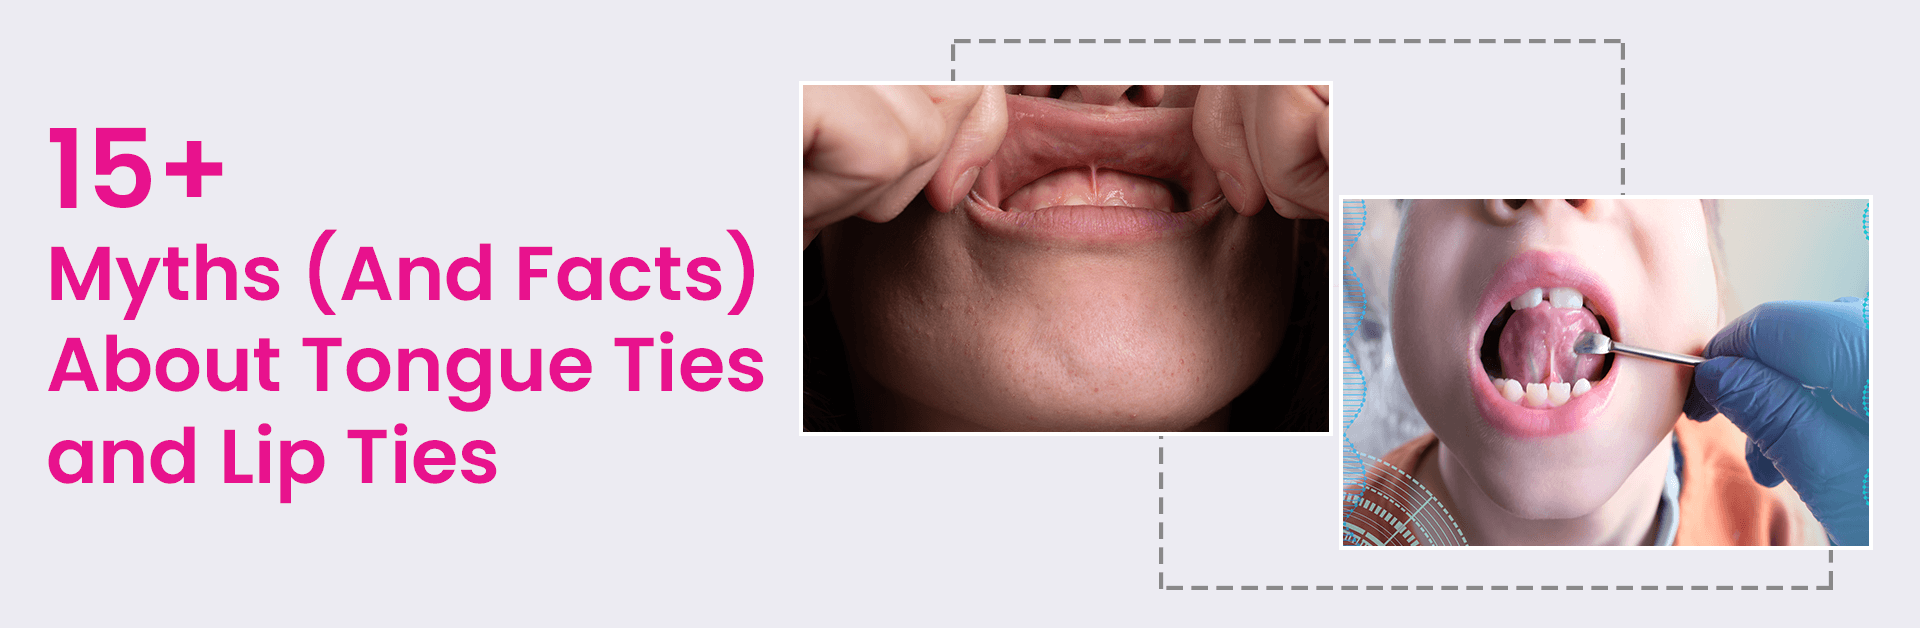 15+ MYTHS (AND FACTS) ABOUT TONGUE TIES AND LIP TIES